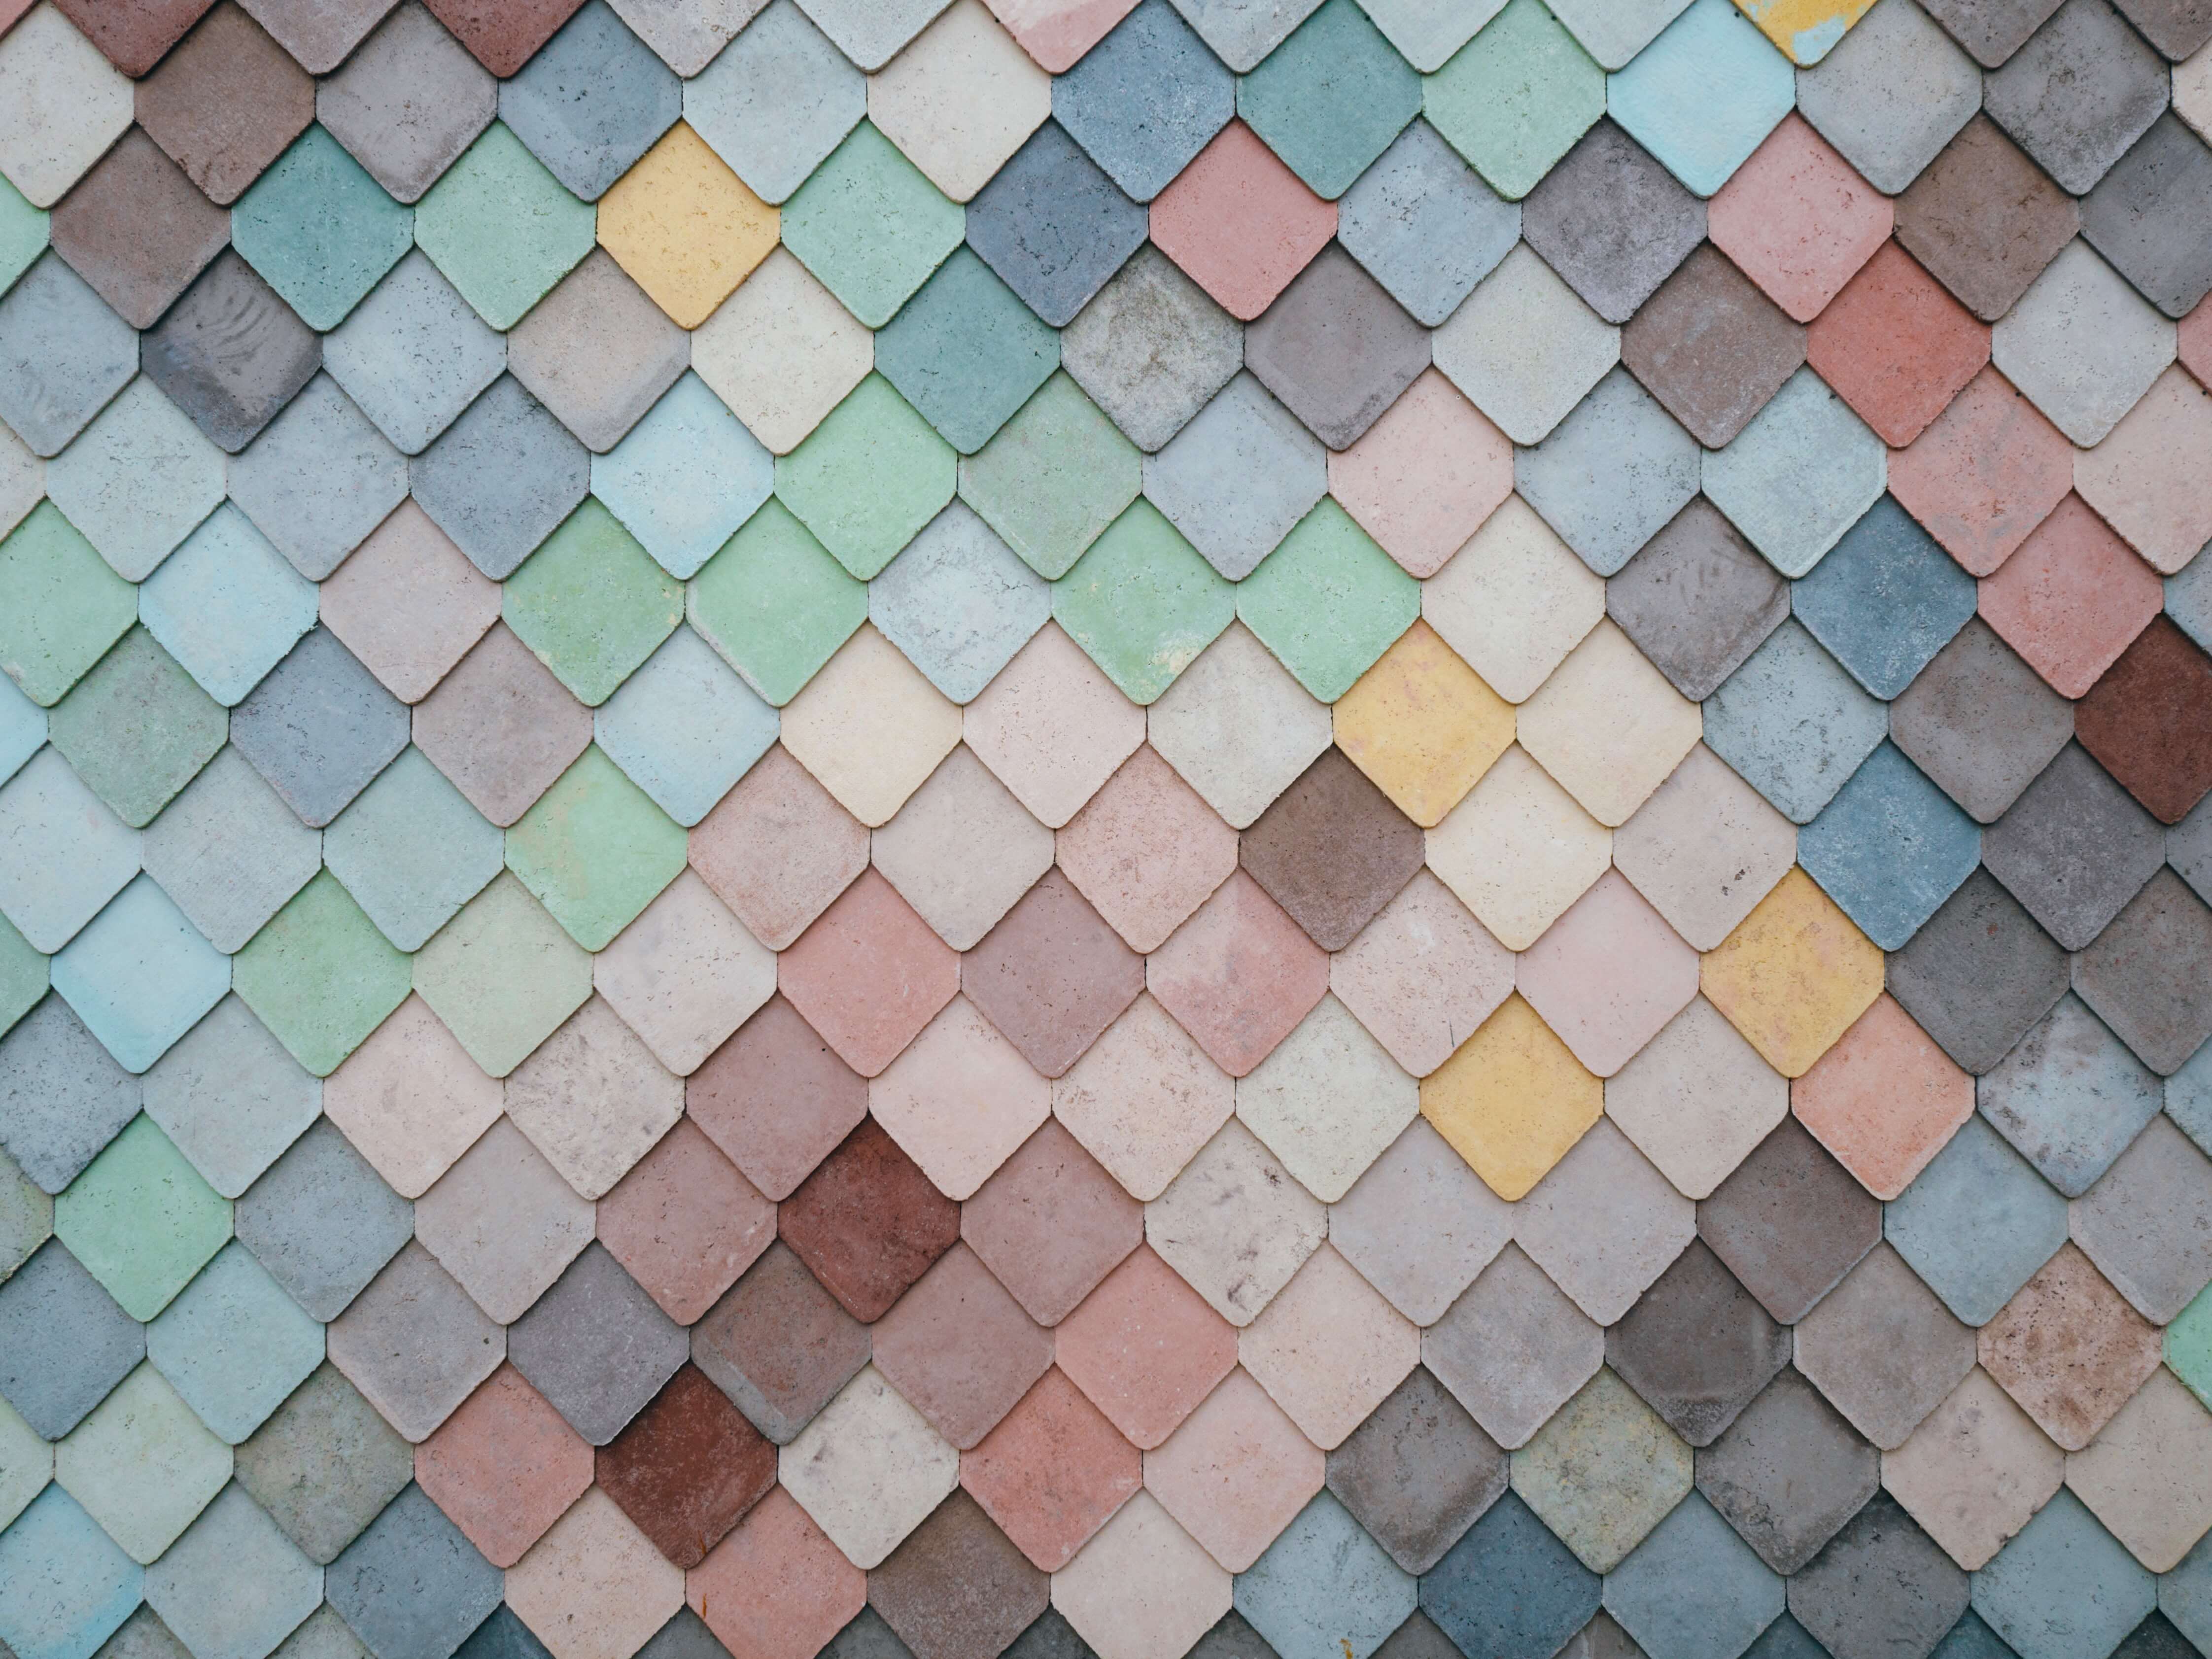 Shingles that look like fish scales in various pastel colors